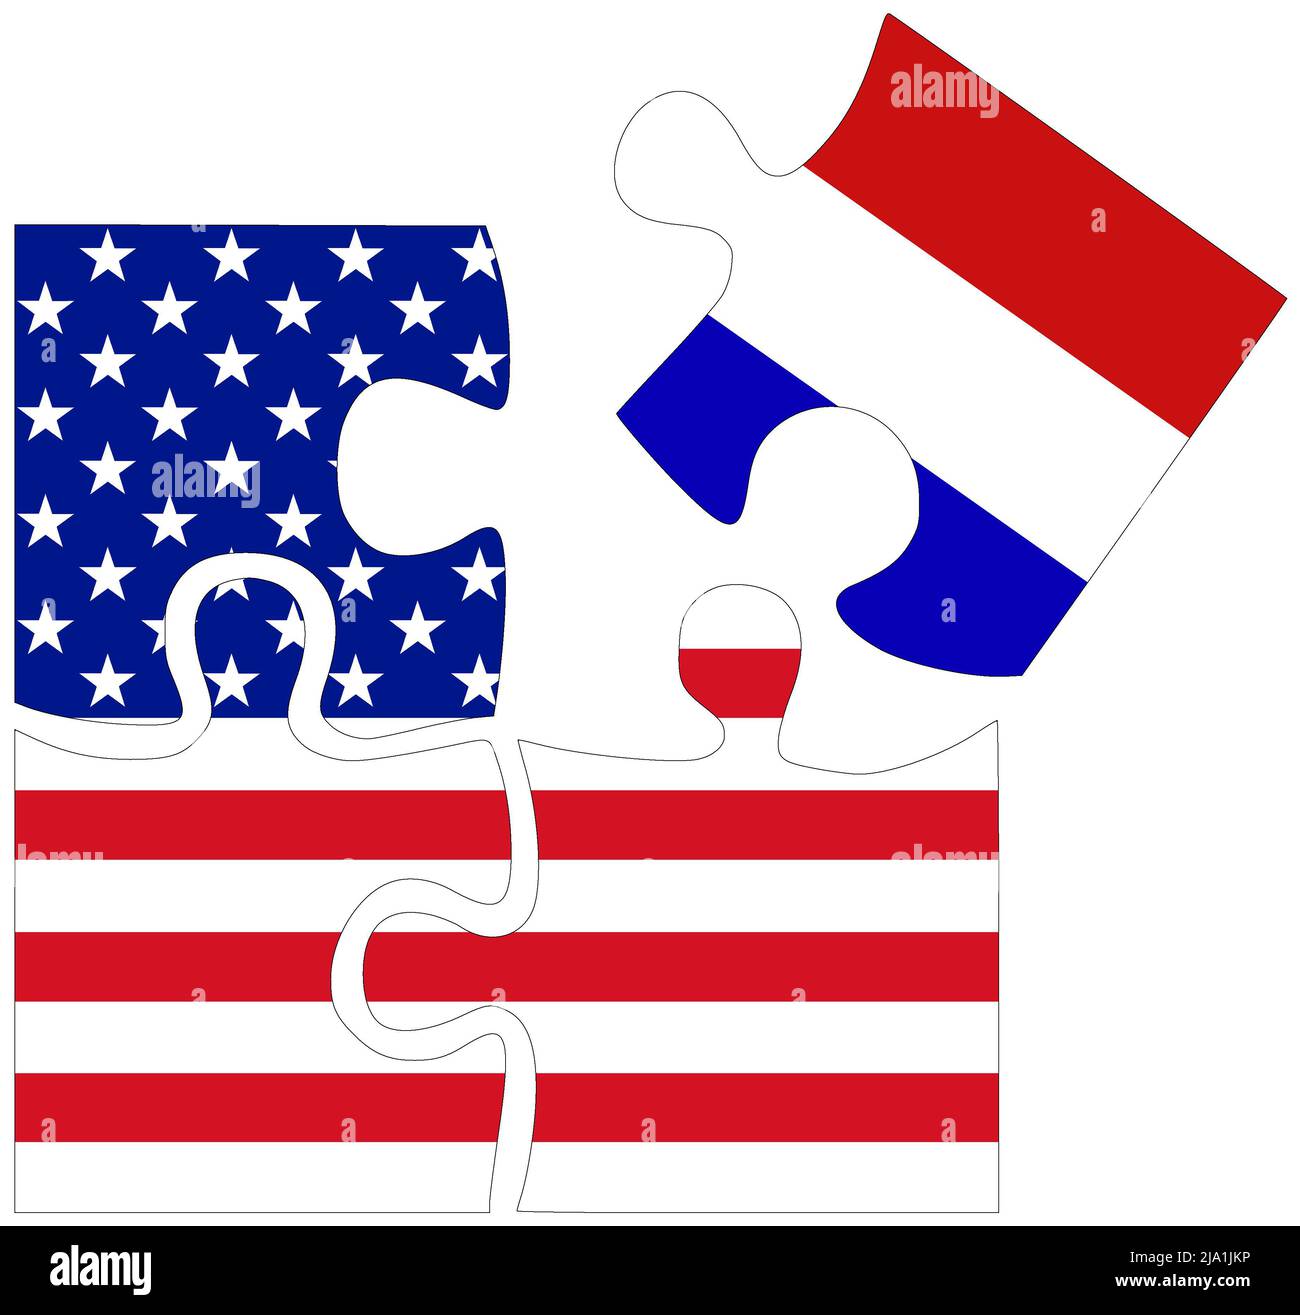 USA - Netherlands : puzzle shapes with flags, symbol of agreement or friendship Stock Photo